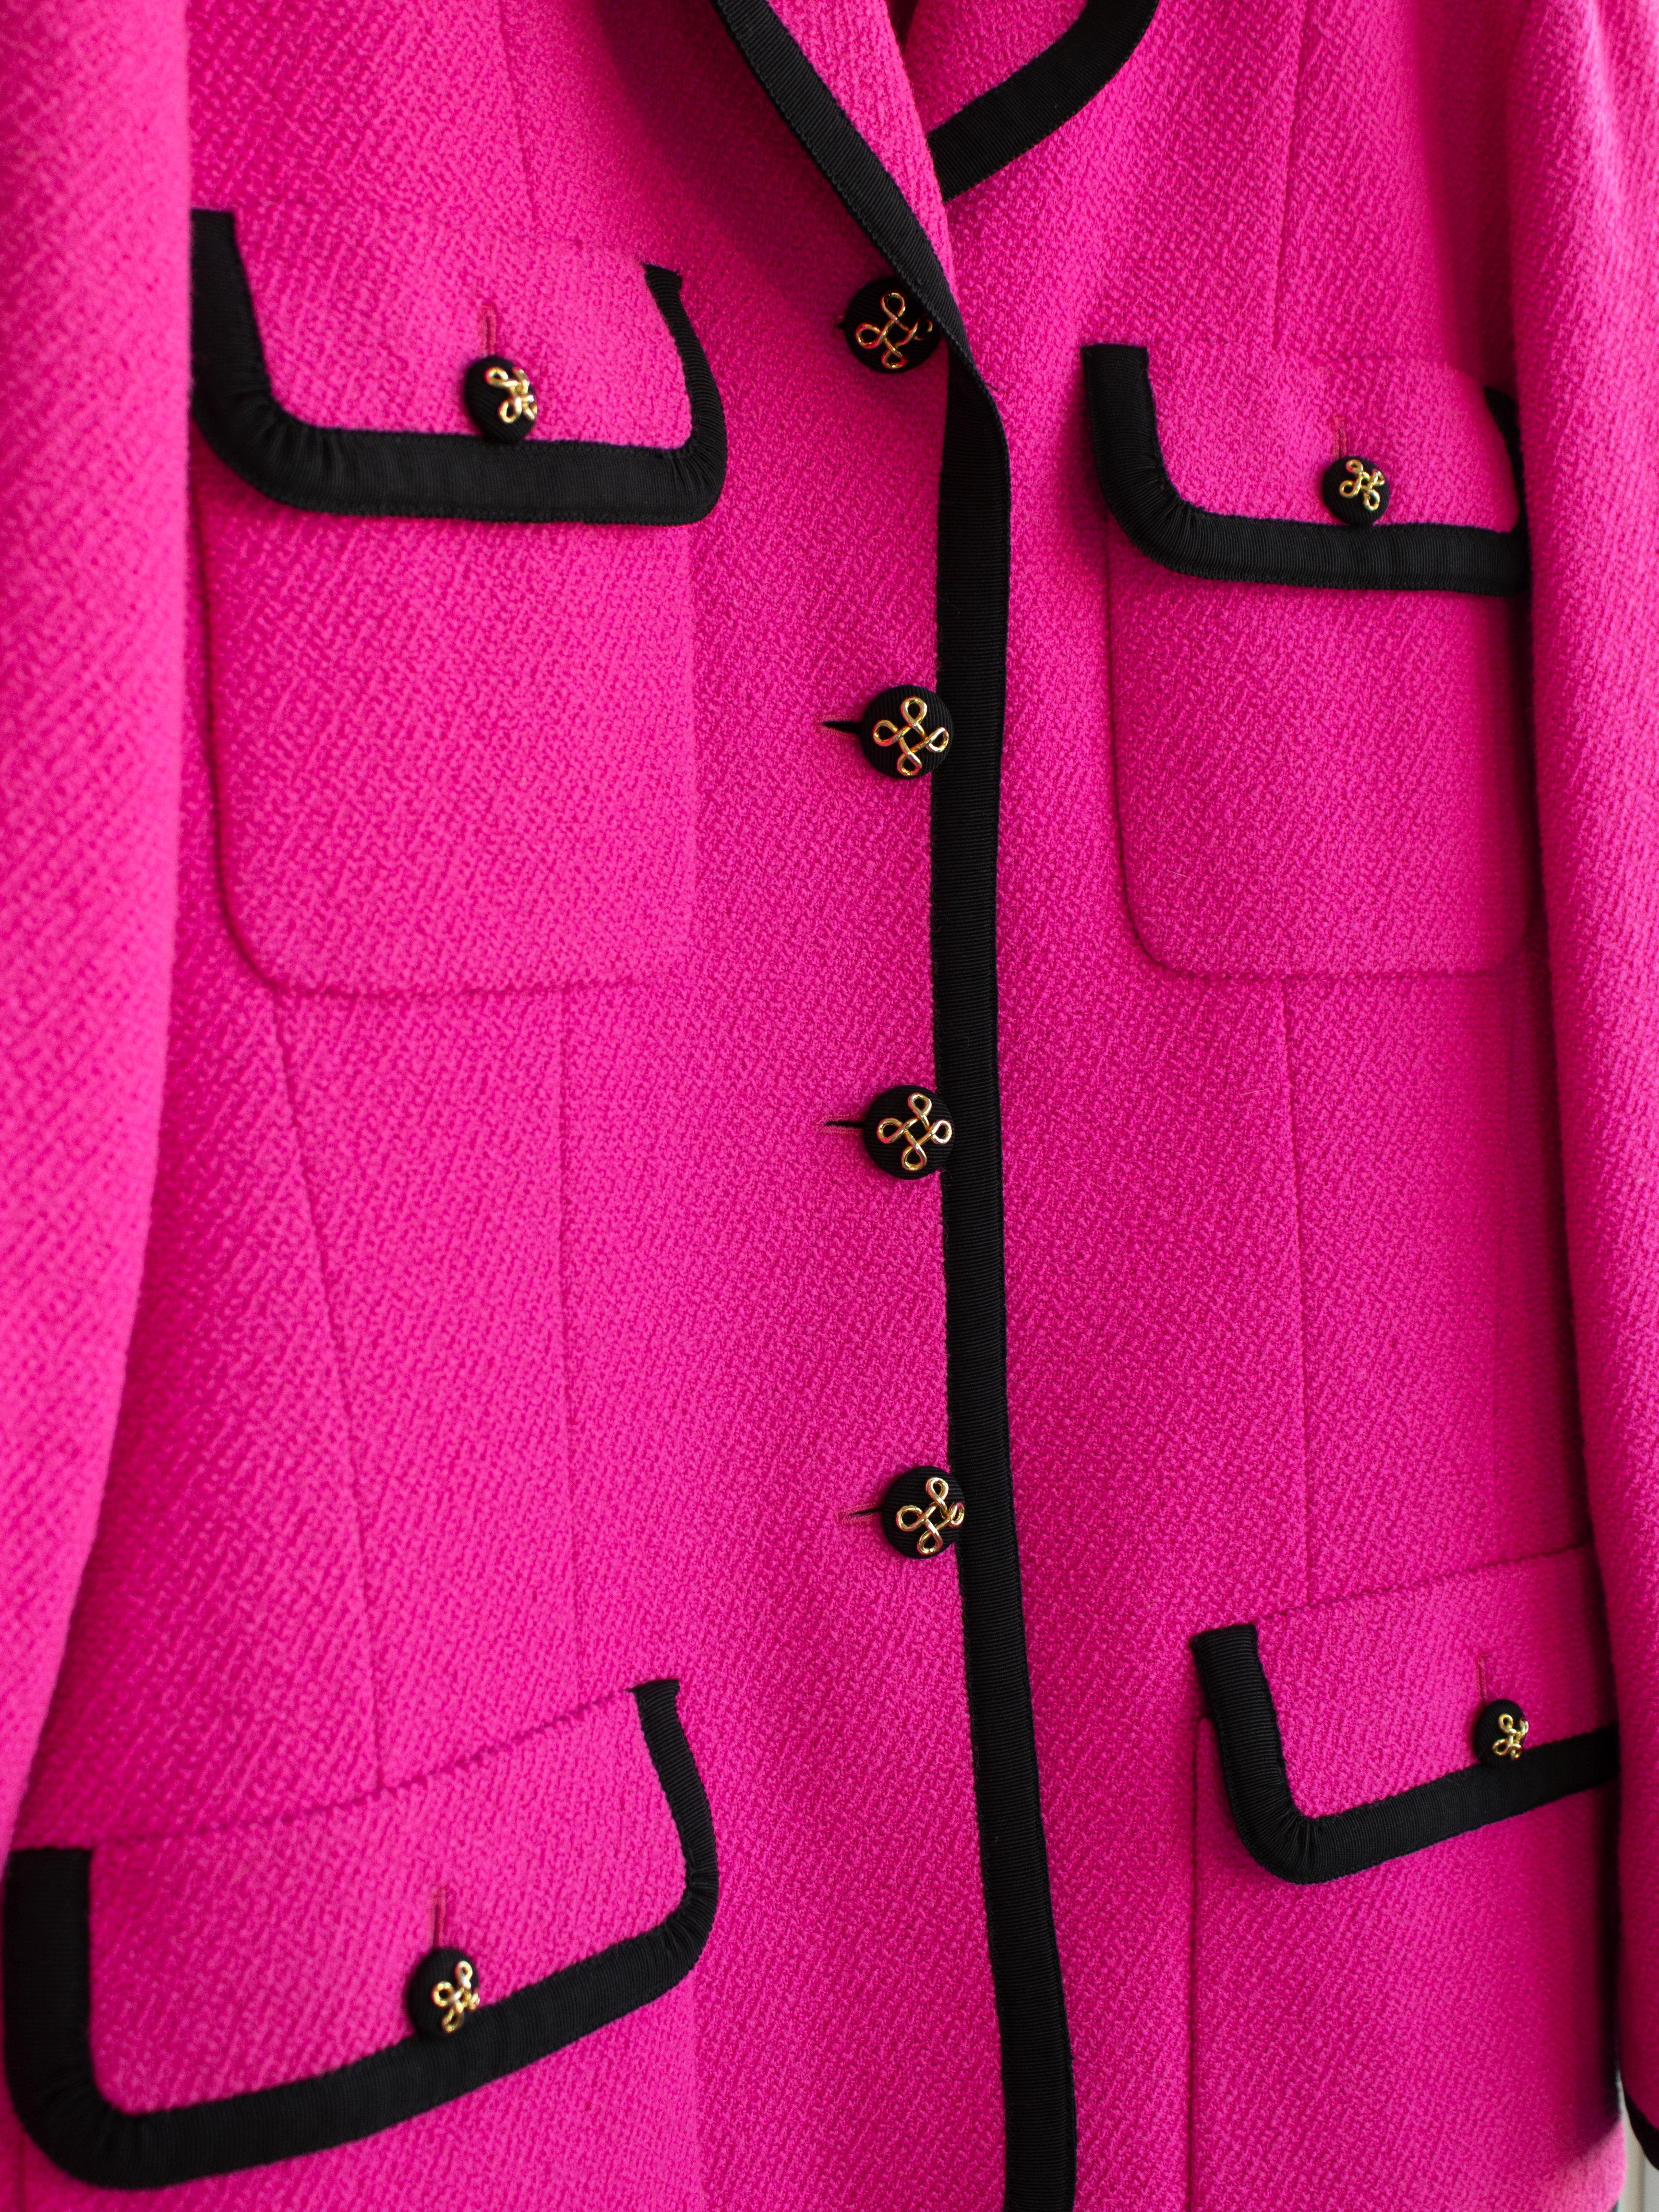 Chanel Vintage S/S 1991 Collector Fuchsia Pink Black Wool Jacket Skirt Suit For Sale 4